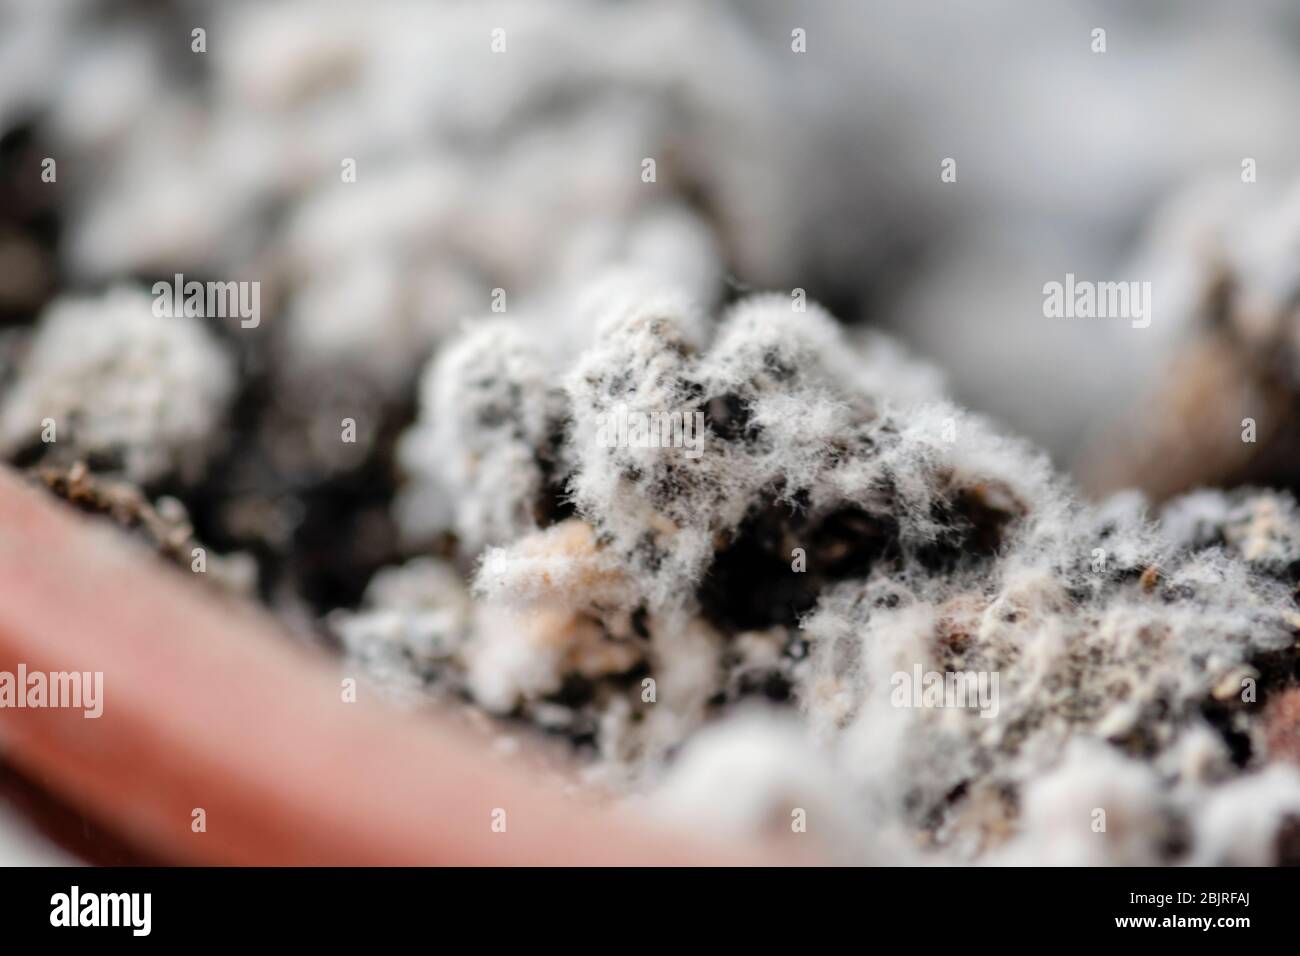 Selective focus on mould growing on a soil in the flower pot with the house plant in humid environment. Fungus disease in houseplant. Stock Photo